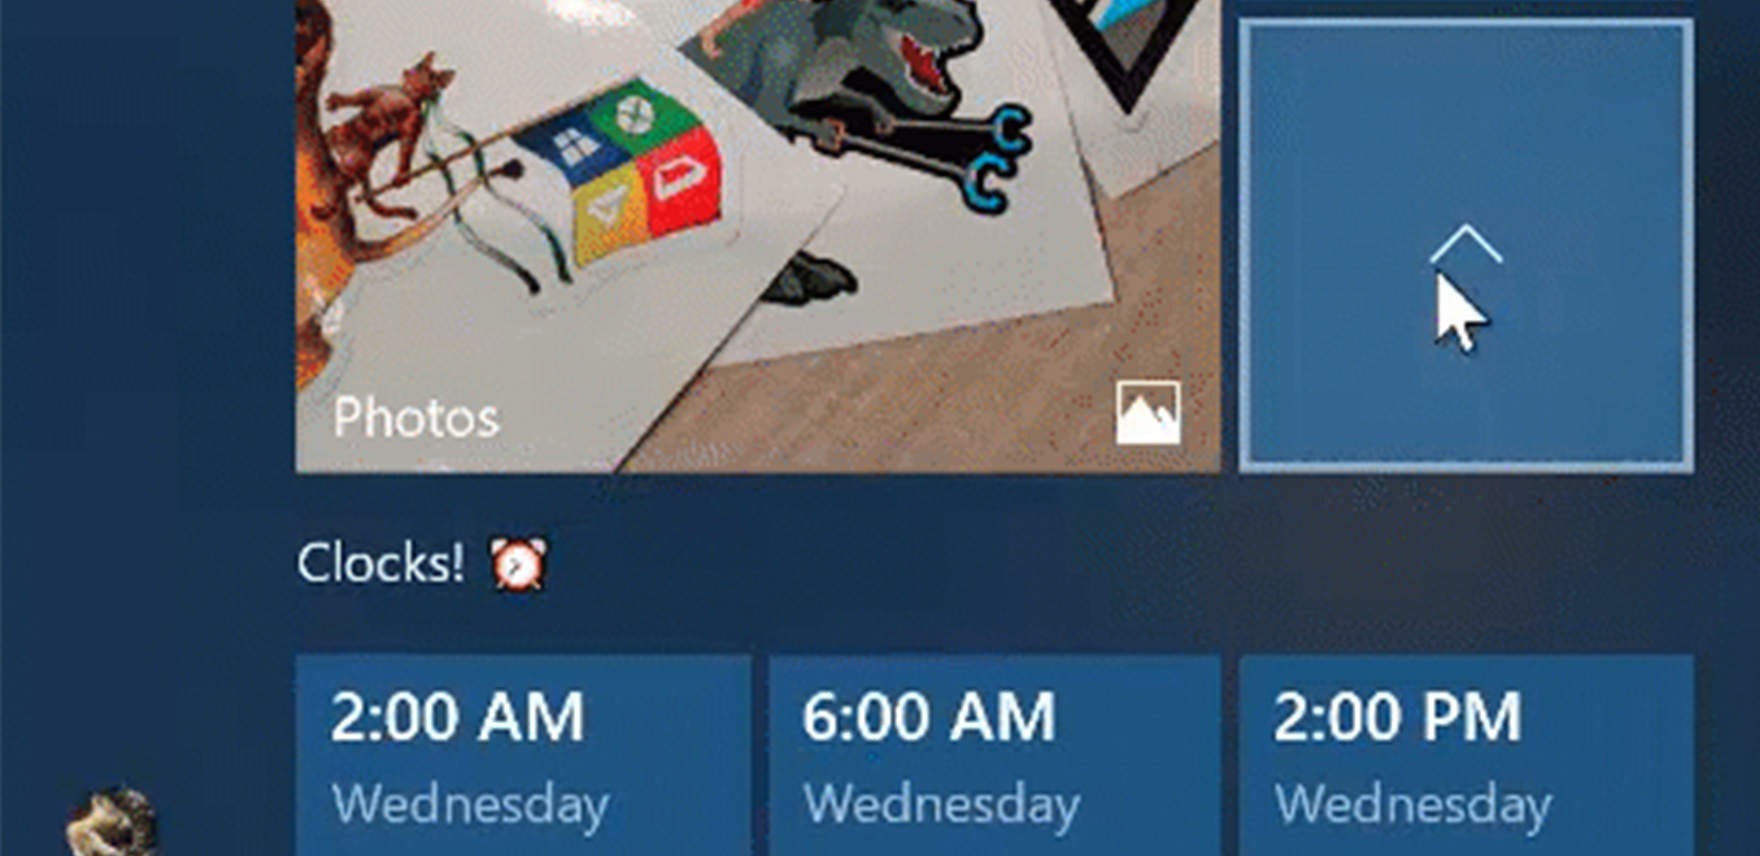 Gif shows cursor arrow hovering over a tile, and upon clicking it shows a Clocks! folder which has times of different locations around the world